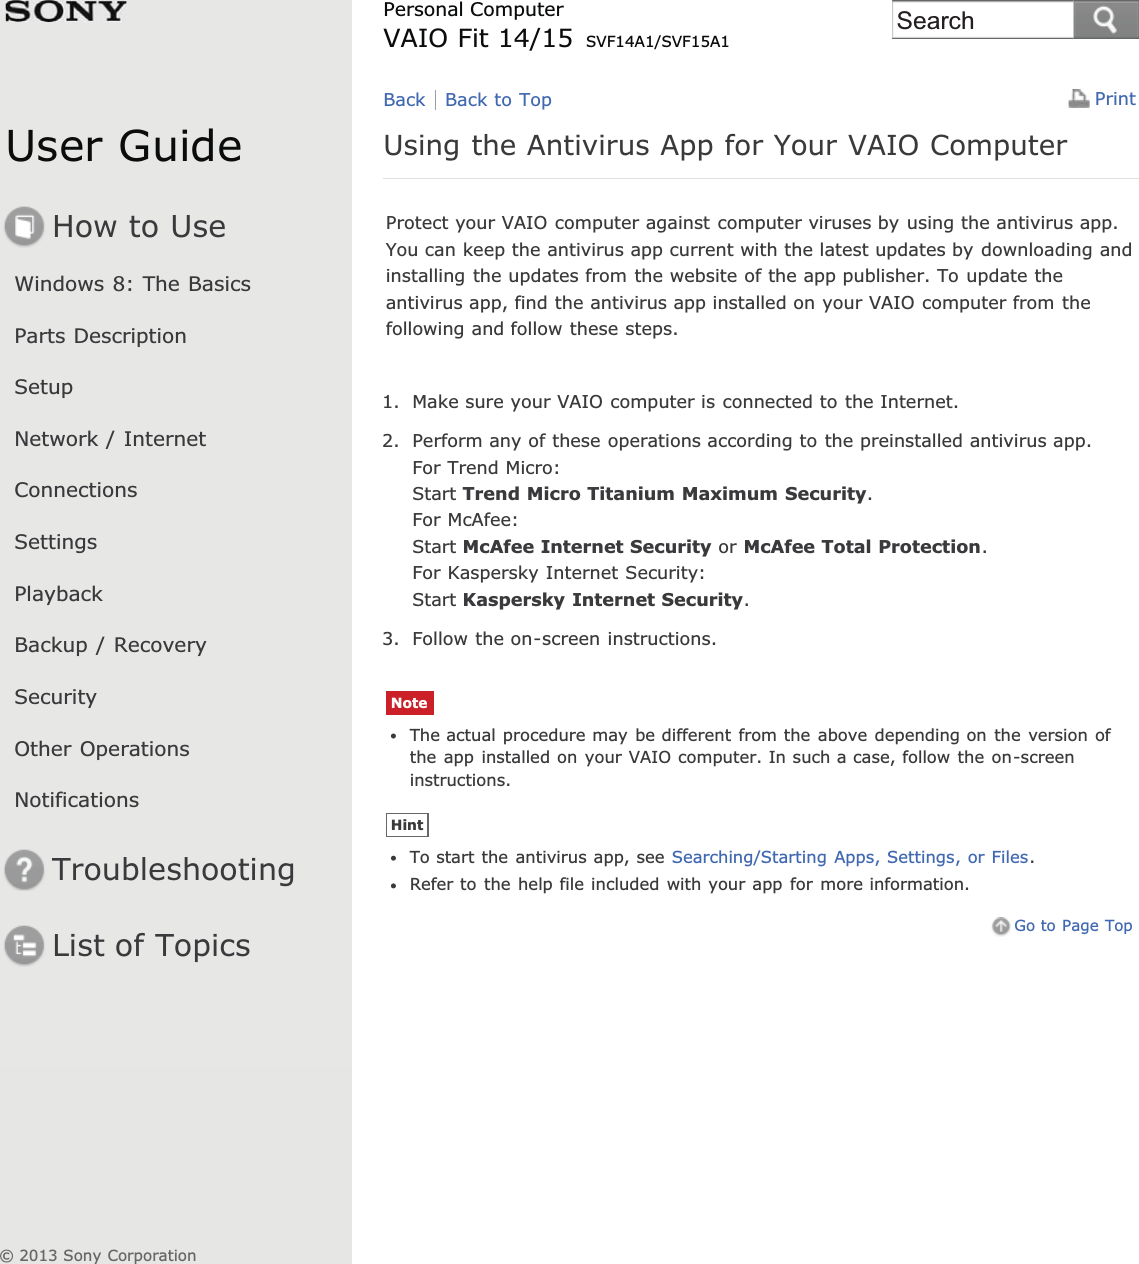 User GuideHow to UseWindows 8: The BasicsParts DescriptionSetupNetwork / InternetConnectionsSettingsPlaybackBackup / RecoverySecurityOther OperationsNotificationsTroubleshootingList of TopicsPrintPersonal ComputerVAIO Fit 14/15 SVF14A1/SVF15A1Using the Antivirus App for Your VAIO ComputerProtect your VAIO computer against computer viruses by using the antivirus app.You can keep the antivirus app current with the latest updates by downloading andinstalling the updates from the website of the app publisher. To update theantivirus app, find the antivirus app installed on your VAIO computer from thefollowing and follow these steps.1. Make sure your VAIO computer is connected to the Internet.2. Perform any of these operations according to the preinstalled antivirus app.For Trend Micro:Start Trend Micro Titanium Maximum Security.For McAfee:Start McAfee Internet Security or McAfee Total Protection.For Kaspersky Internet Security:Start Kaspersky Internet Security.3. Follow the on-screen instructions.NoteThe actual procedure may be different from the above depending on the version ofthe app installed on your VAIO computer. In such a case, follow the on-screeninstructions.HintTo start the antivirus app, see Searching/Starting Apps, Settings, or Files.Refer to the help file included with your app for more information.Go to Page TopBack Back to Top© 2013 Sony CorporationSearch